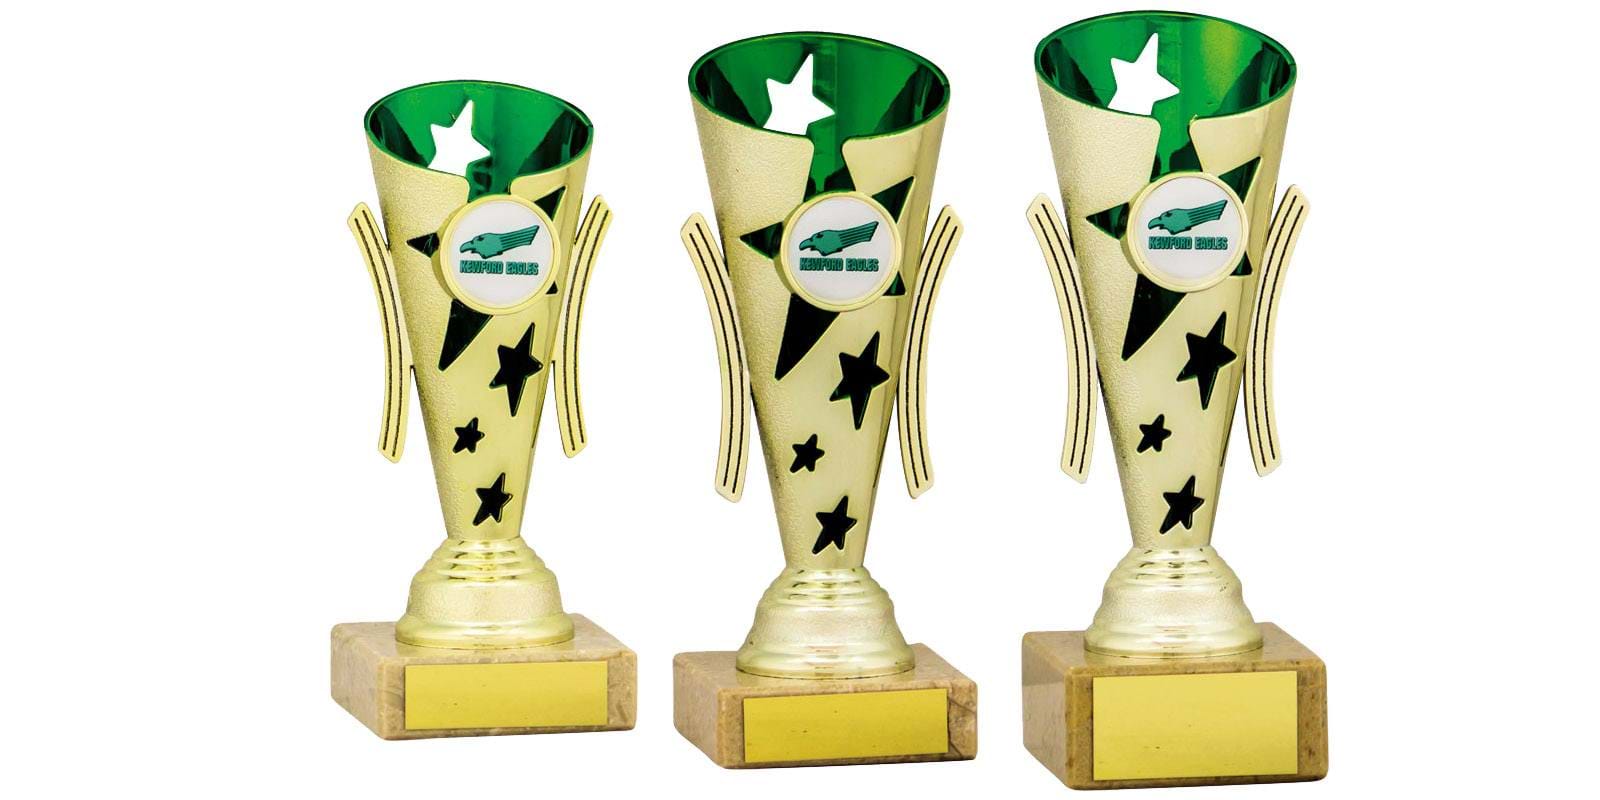 Green Gold Trophies 1981 Series